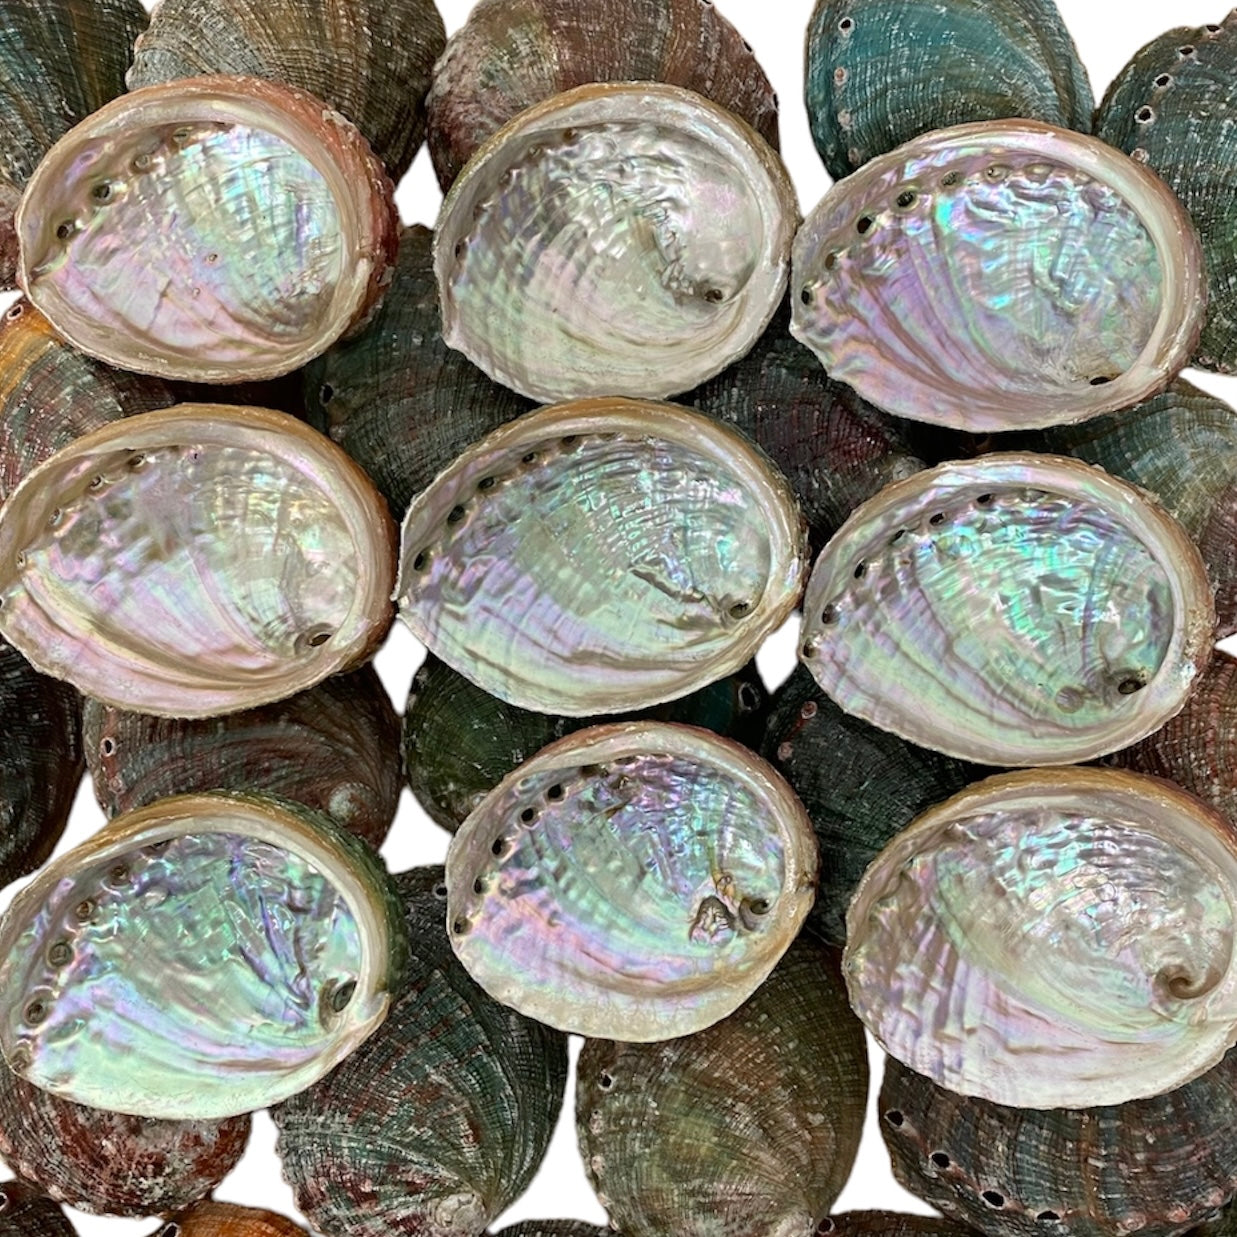 NessaStores 20 Abalone Shells 2.5 to 3.5 Inches | Beautiful All Natural Smudge Bowl - Perfect for Smudge Sticks, Incense Sticks and a Sage Smudge Kit. #JC-020